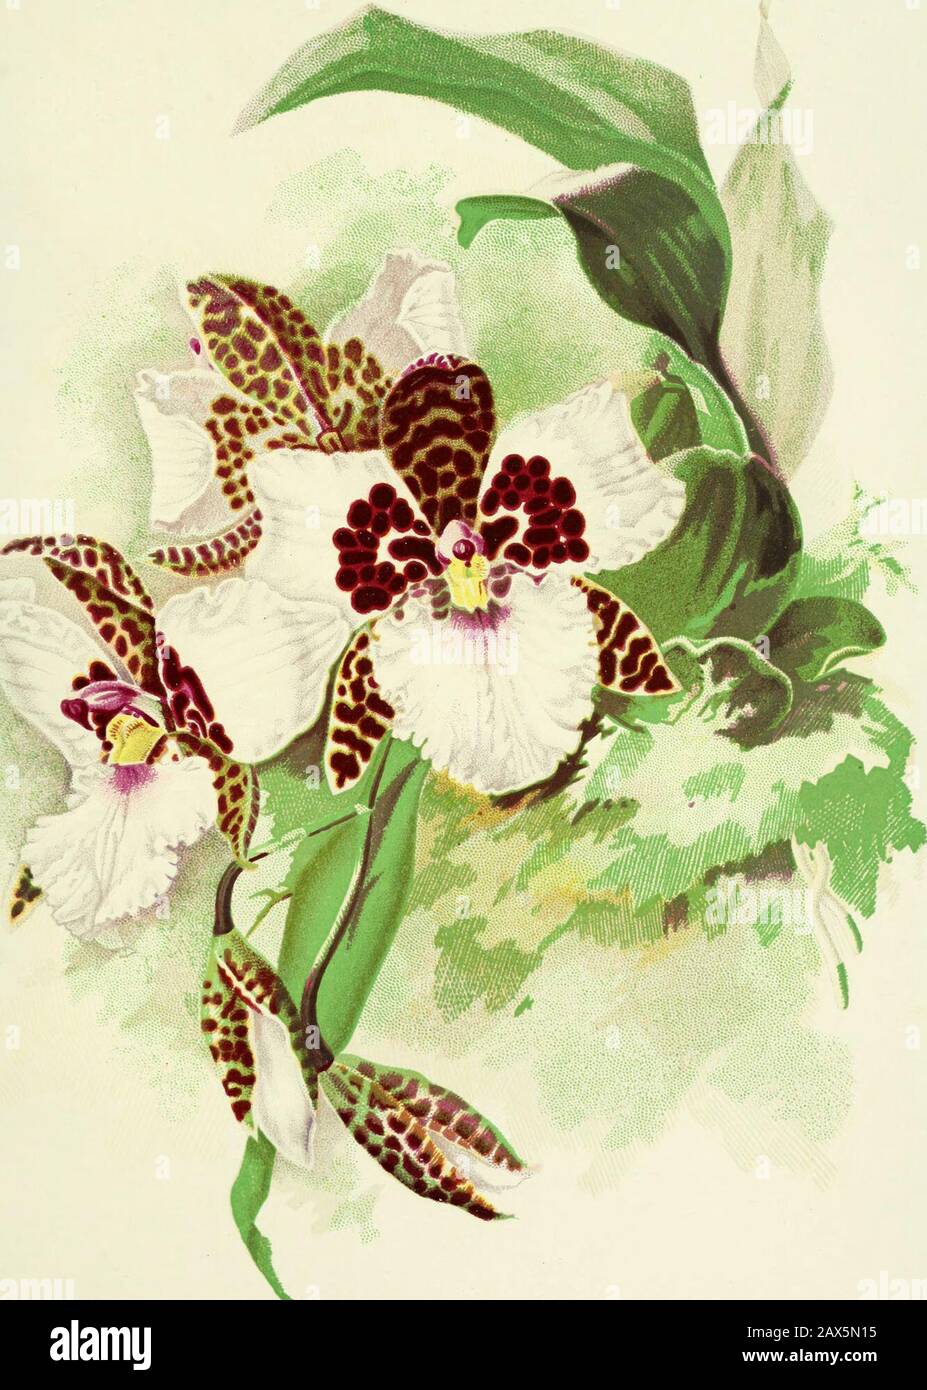 The Woodlands orchids described and illuswith stories of orchid collecting . purplish markings. Pescatorei grandiflonm.—Immense. The lip has a yellowdash at base. Pescatorei splendens.—Sepals and petals white ; lip hand-somely spotted with purple. Pescatorei violaceum.—The whole flower is tinted with violet. Crispum purpureum shows a similar peculiarity, but the tint is purple. Crispum Dayanum.—Tht sepals have a large irregularpatch of darkest mauve in the centre, the petals a spot or twoof the same colour and a streak at the base. The lip is white. Old-fashioned people have not yet learned to Stock Photo